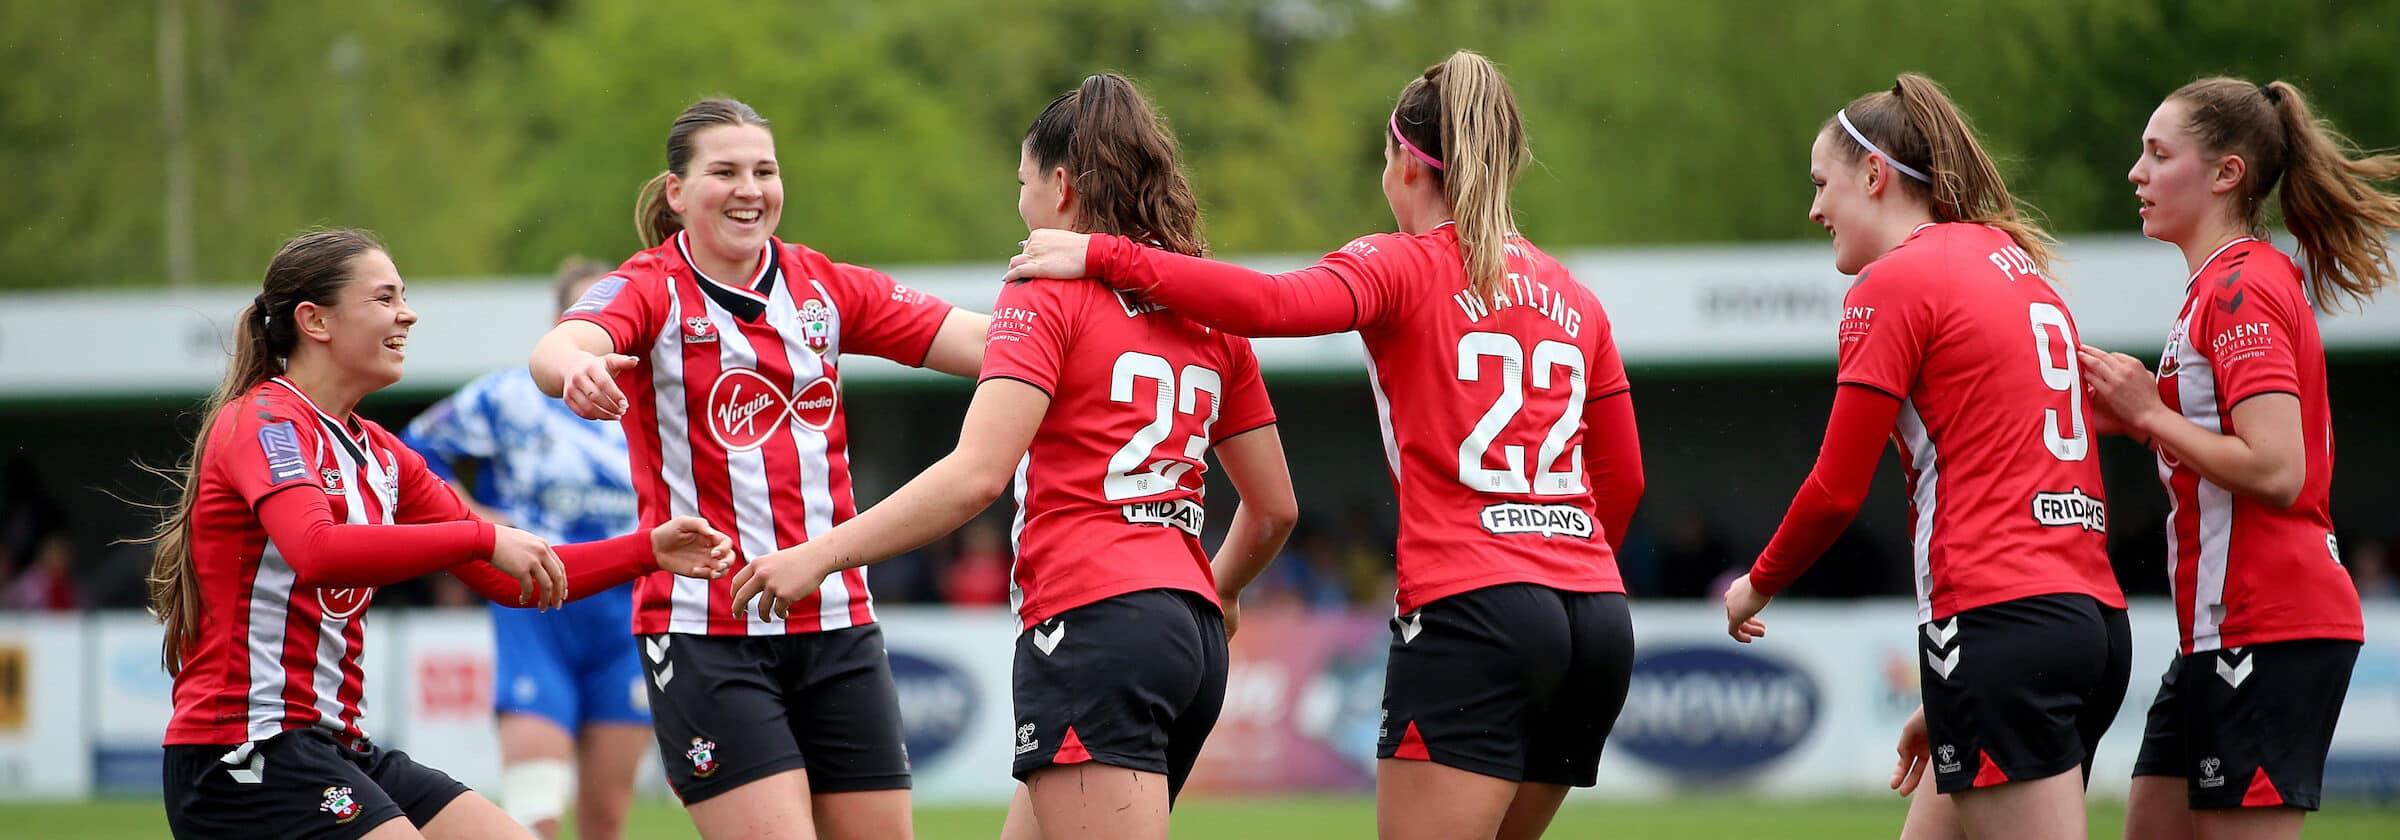 Megan Collett of Southampton celebrates scoring with team mates during The FA Womens National League match between Southampton Women and Cardiff City e1653044181736